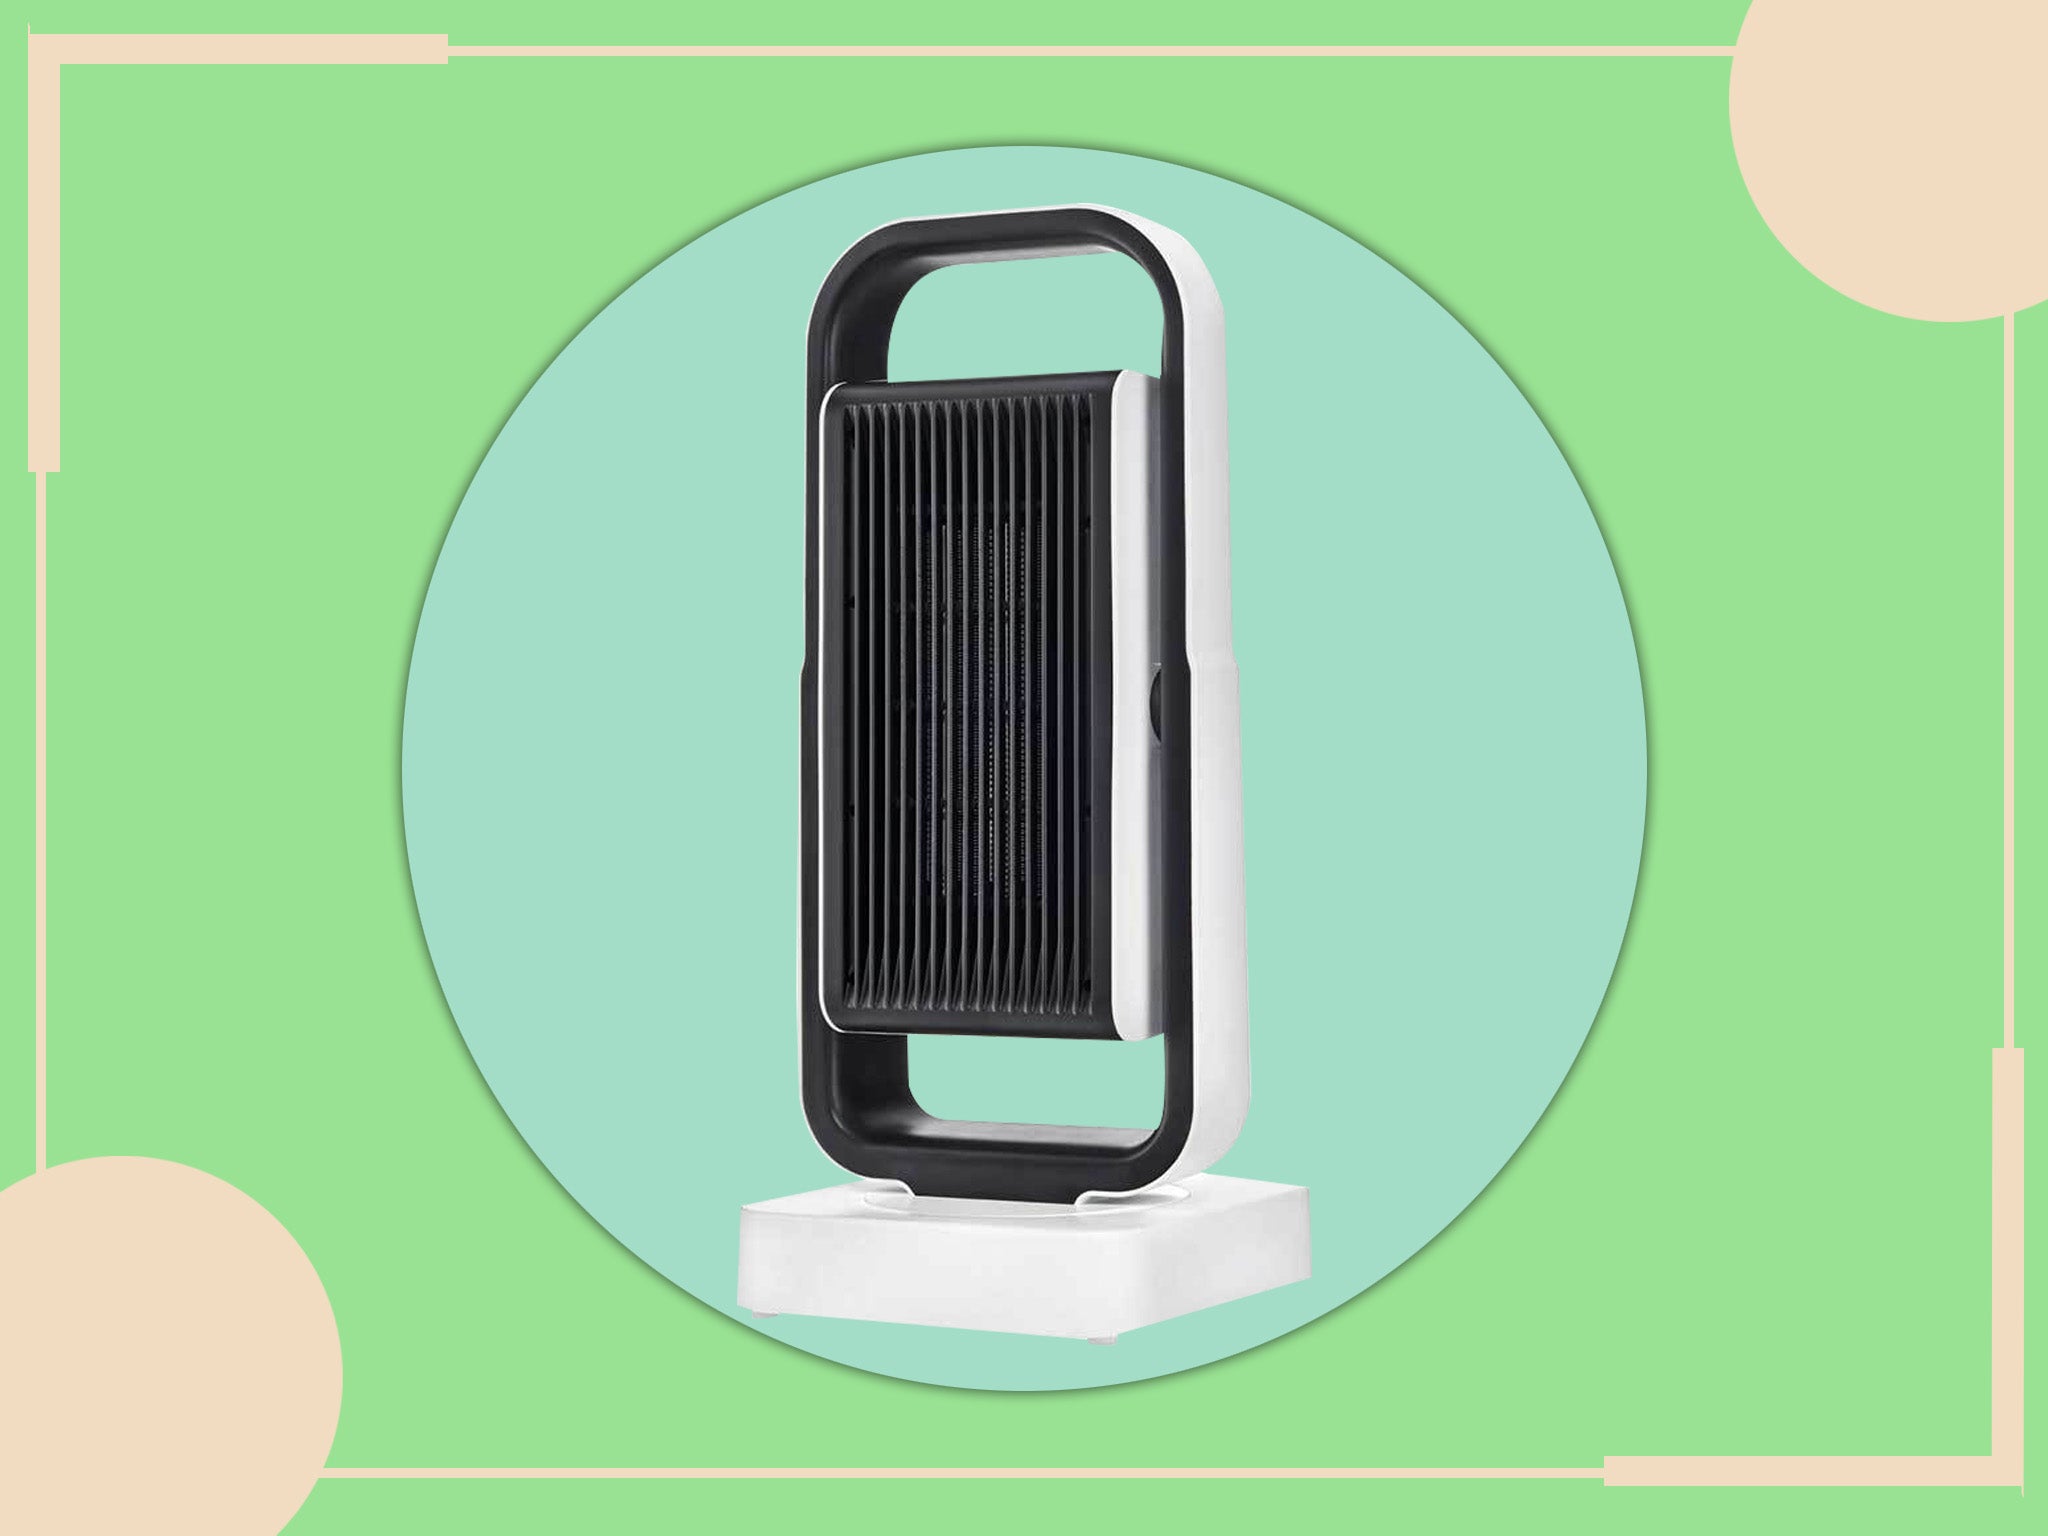 The heater can be controlled from your phone and has 3D air circulation